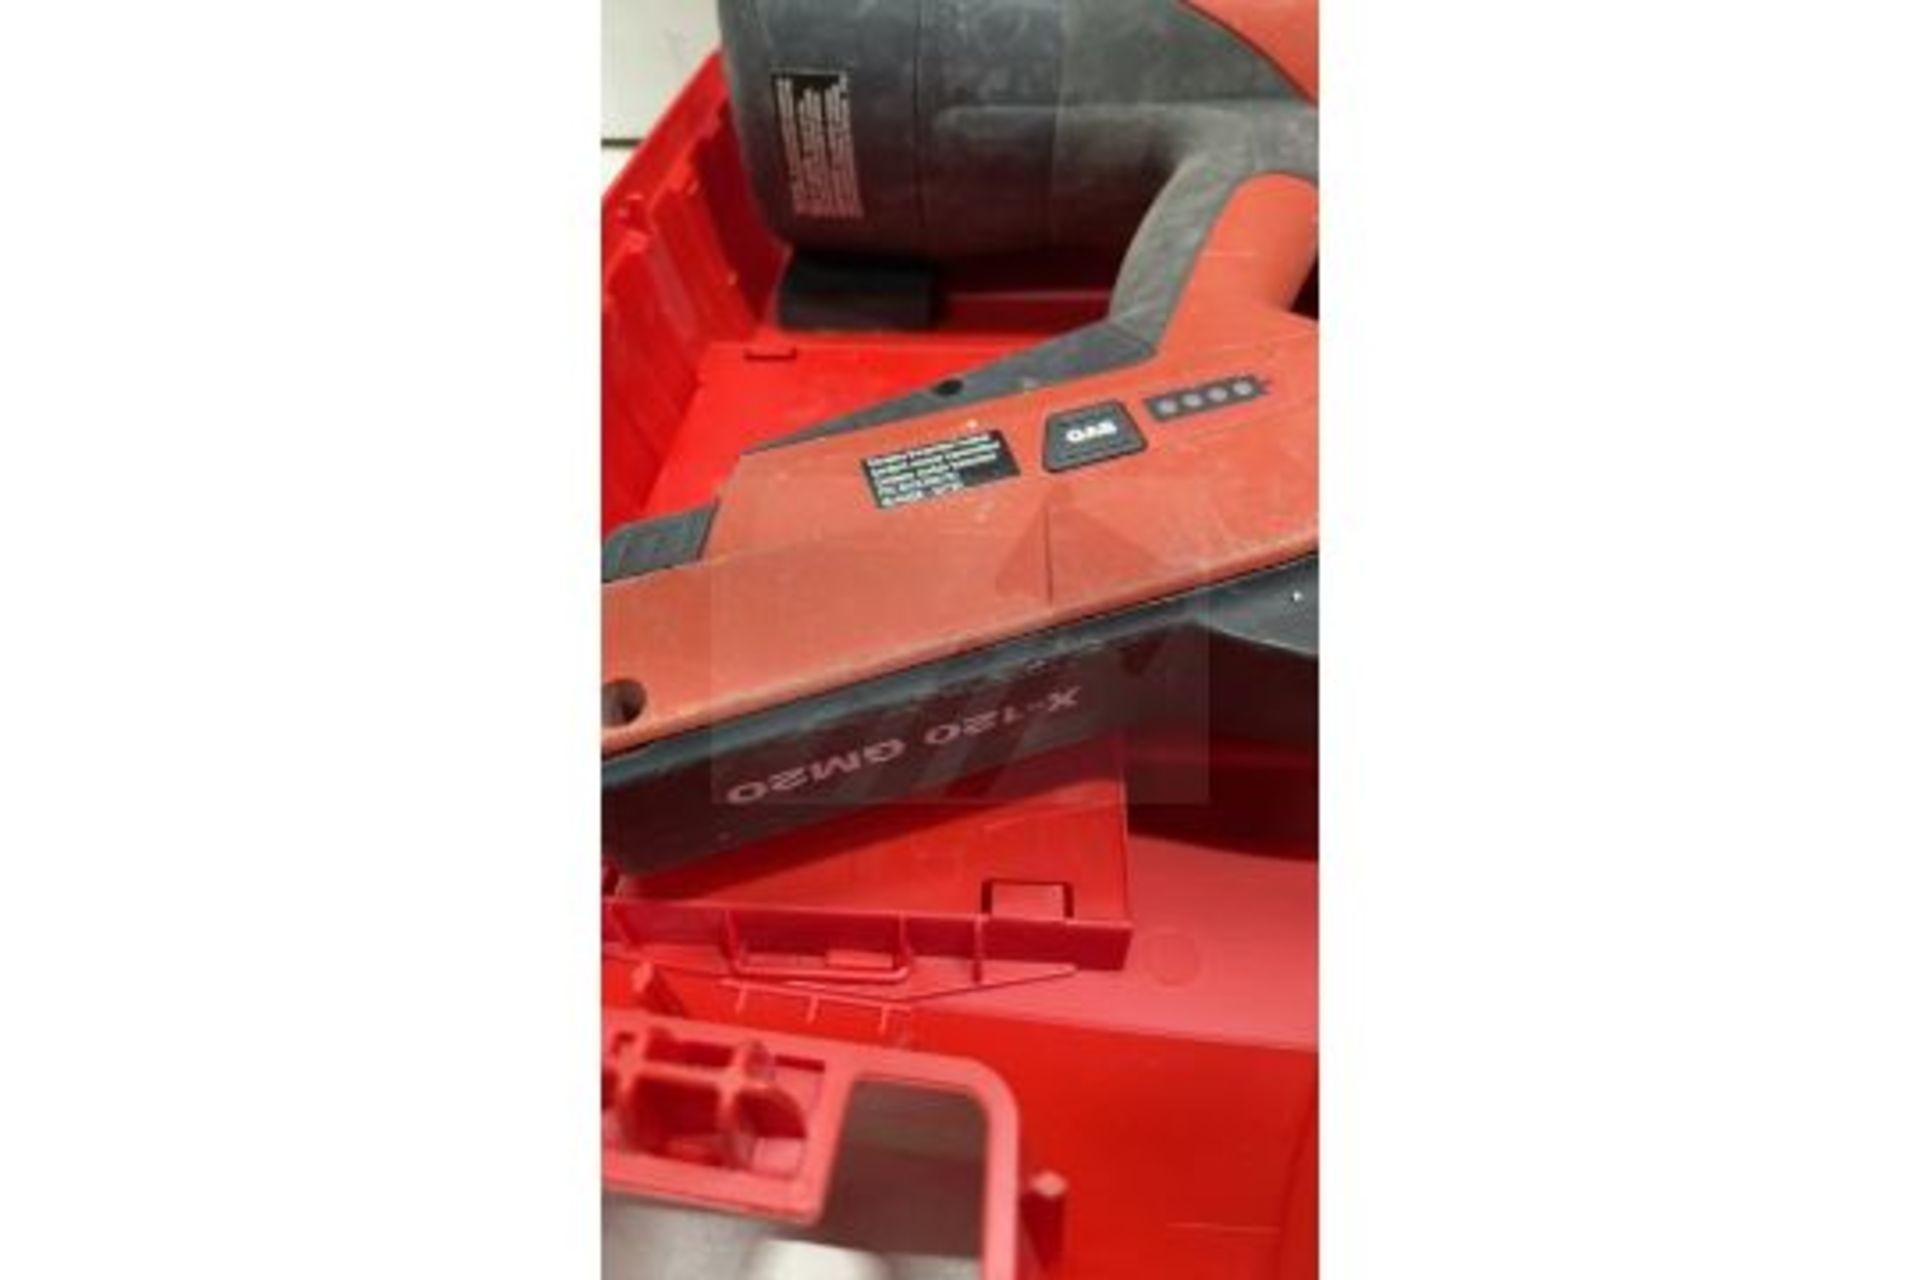 Hilti GX 120-ME Fully Automatic Gas-Actuated Fastening Tool - Image 4 of 5